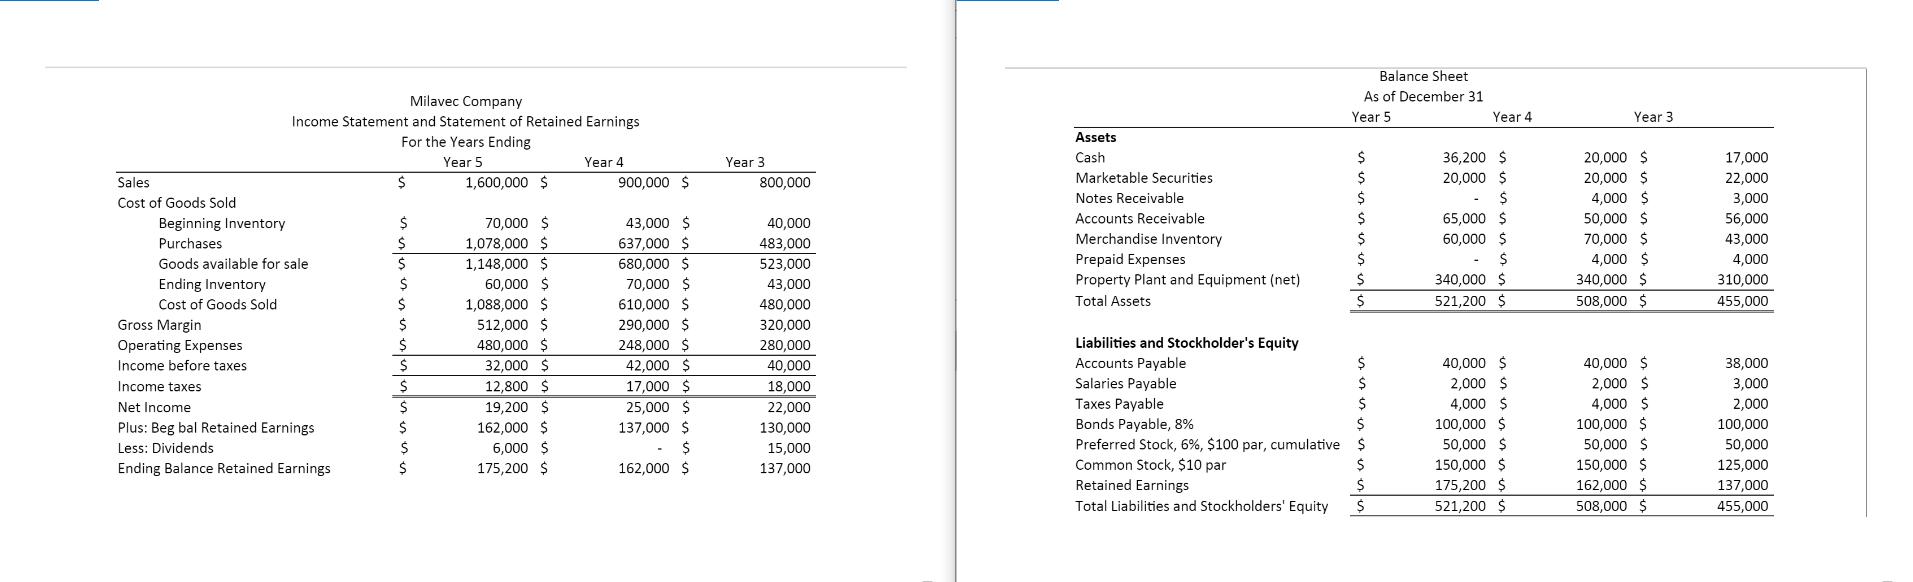 Balance Sheet As of December 31 Year 5 Year 4 Year 3 Year 3 800,000 36,200 $ 20,000 $ Milavec Company Income Statement and St